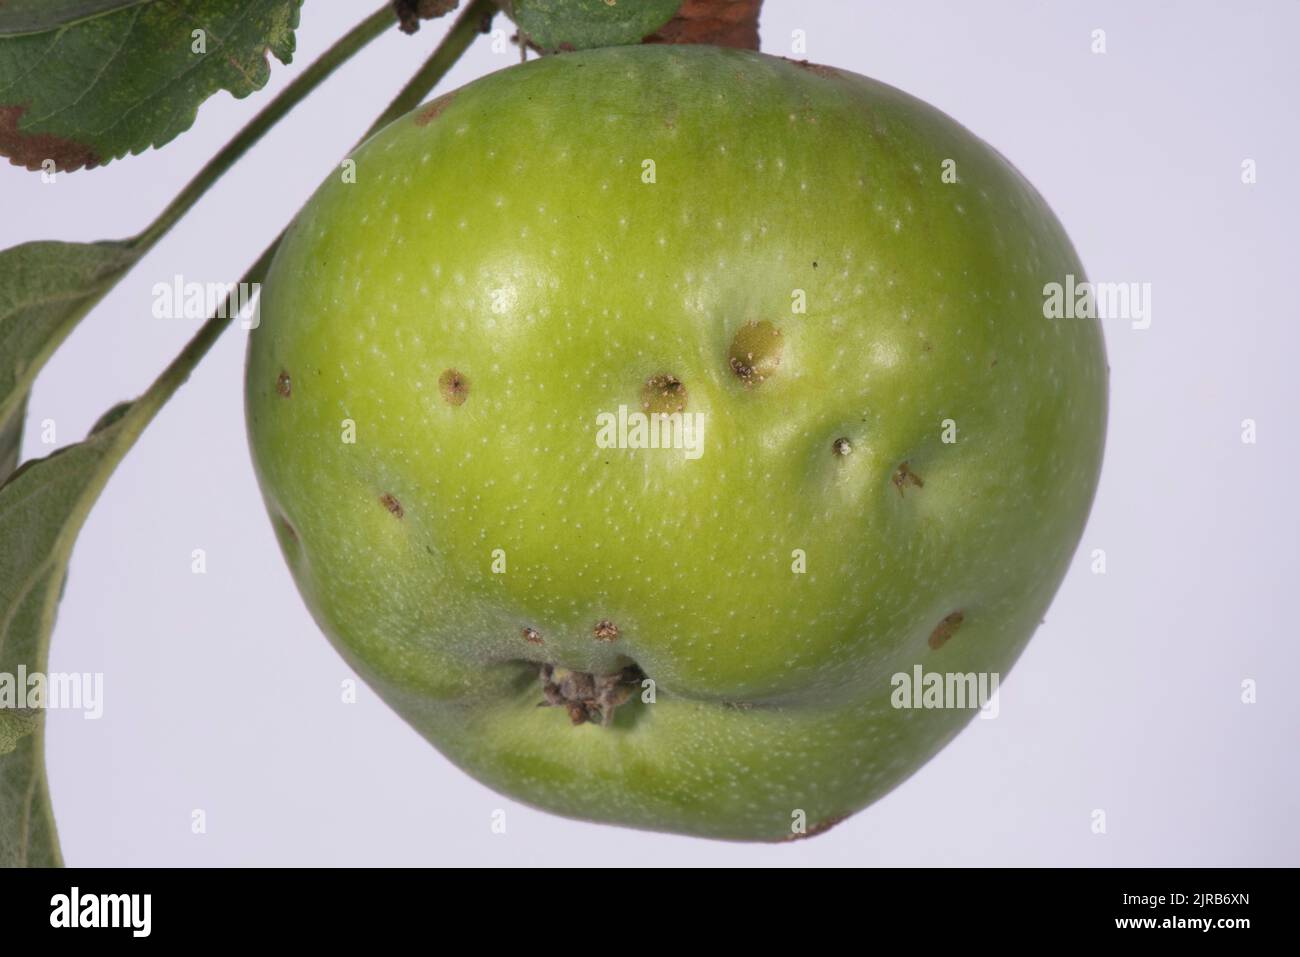 Skin deformity on an apple fruit known as bitter pit which is thought to be a result of calcium deficiency, Berkshire, August Stock Photo